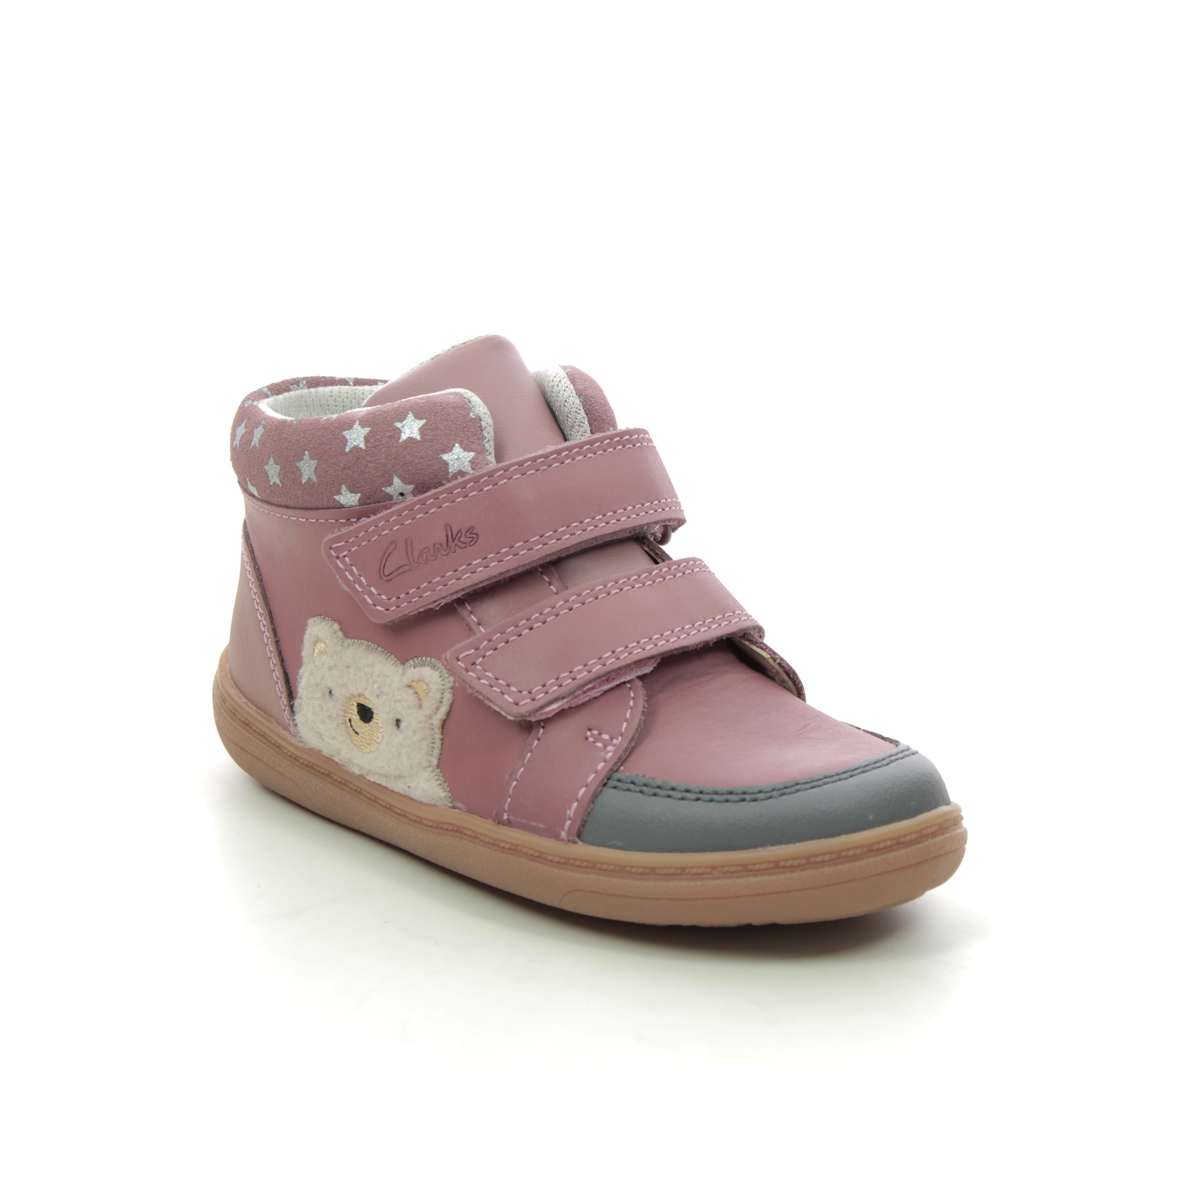 Clarks Flash Bear K Pink Leather Kids Toddler Girls Boots 6927-86F in a Plain Leather in Size 8.5